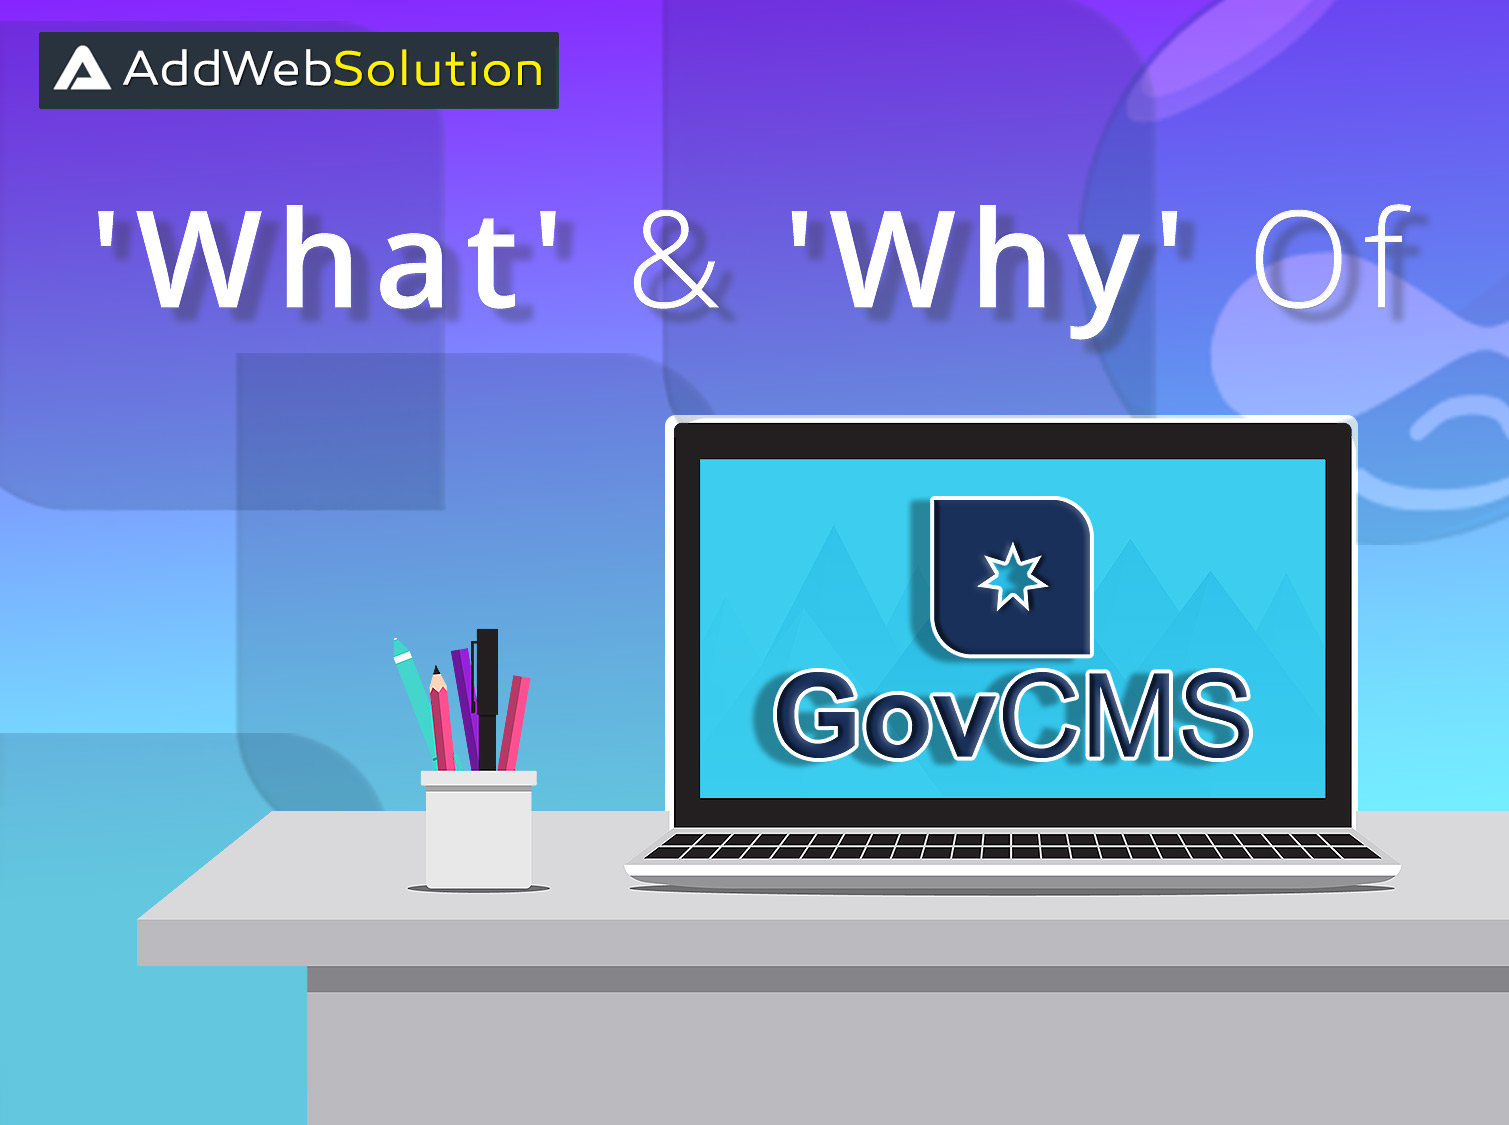 Why Of GovCMS